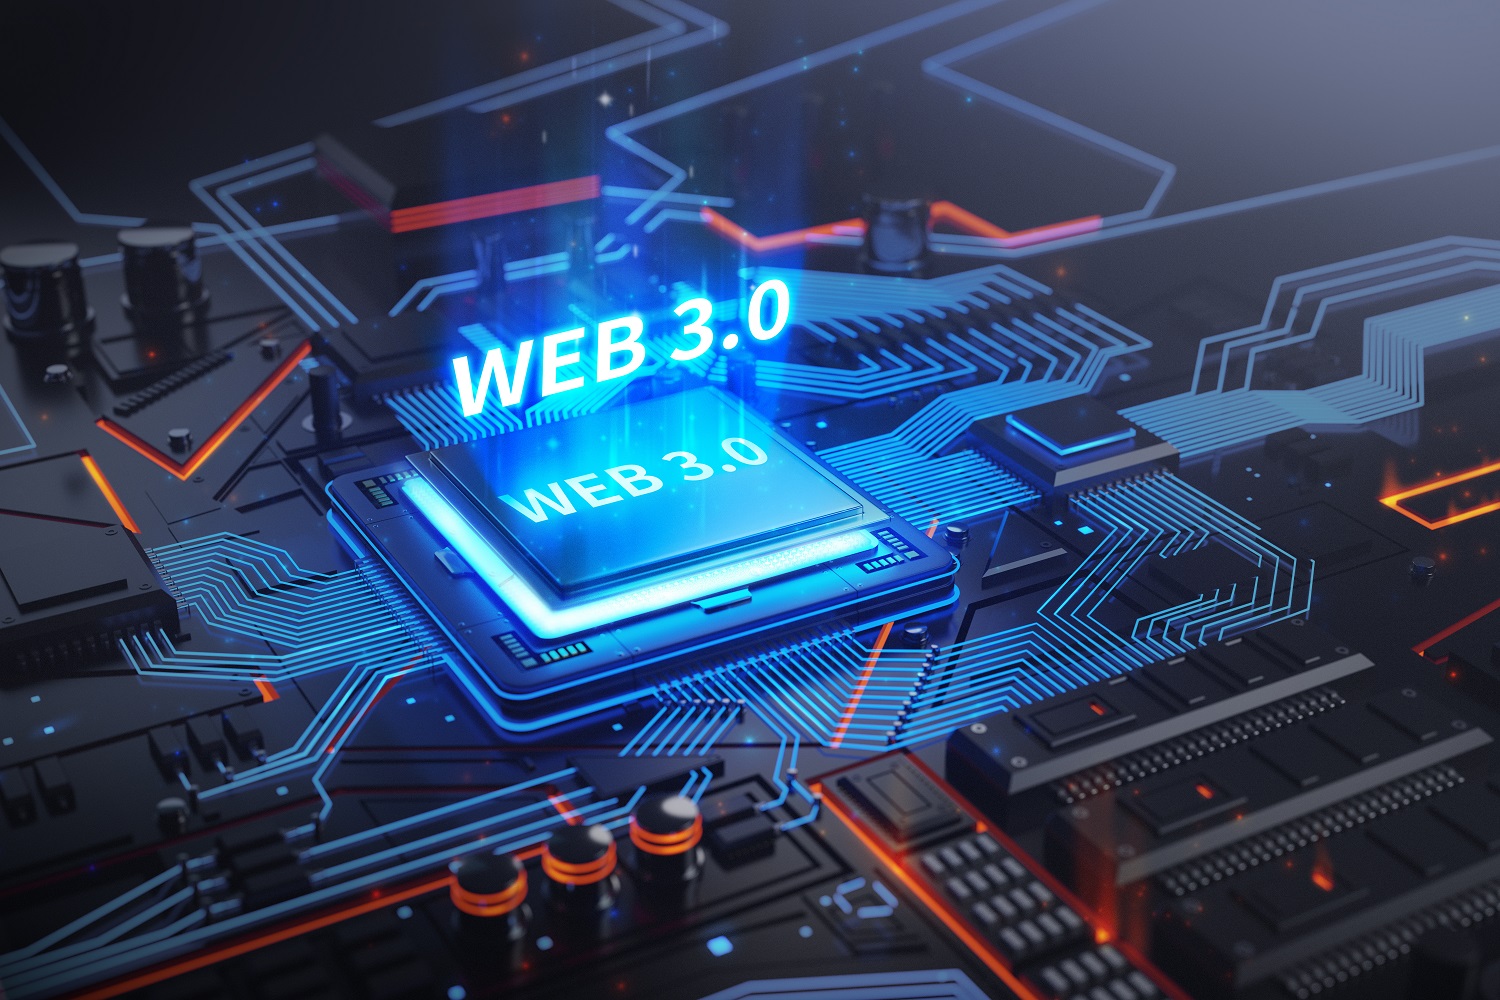 A CPU on a circuit board, with the text “Web 3.0” placed above it.